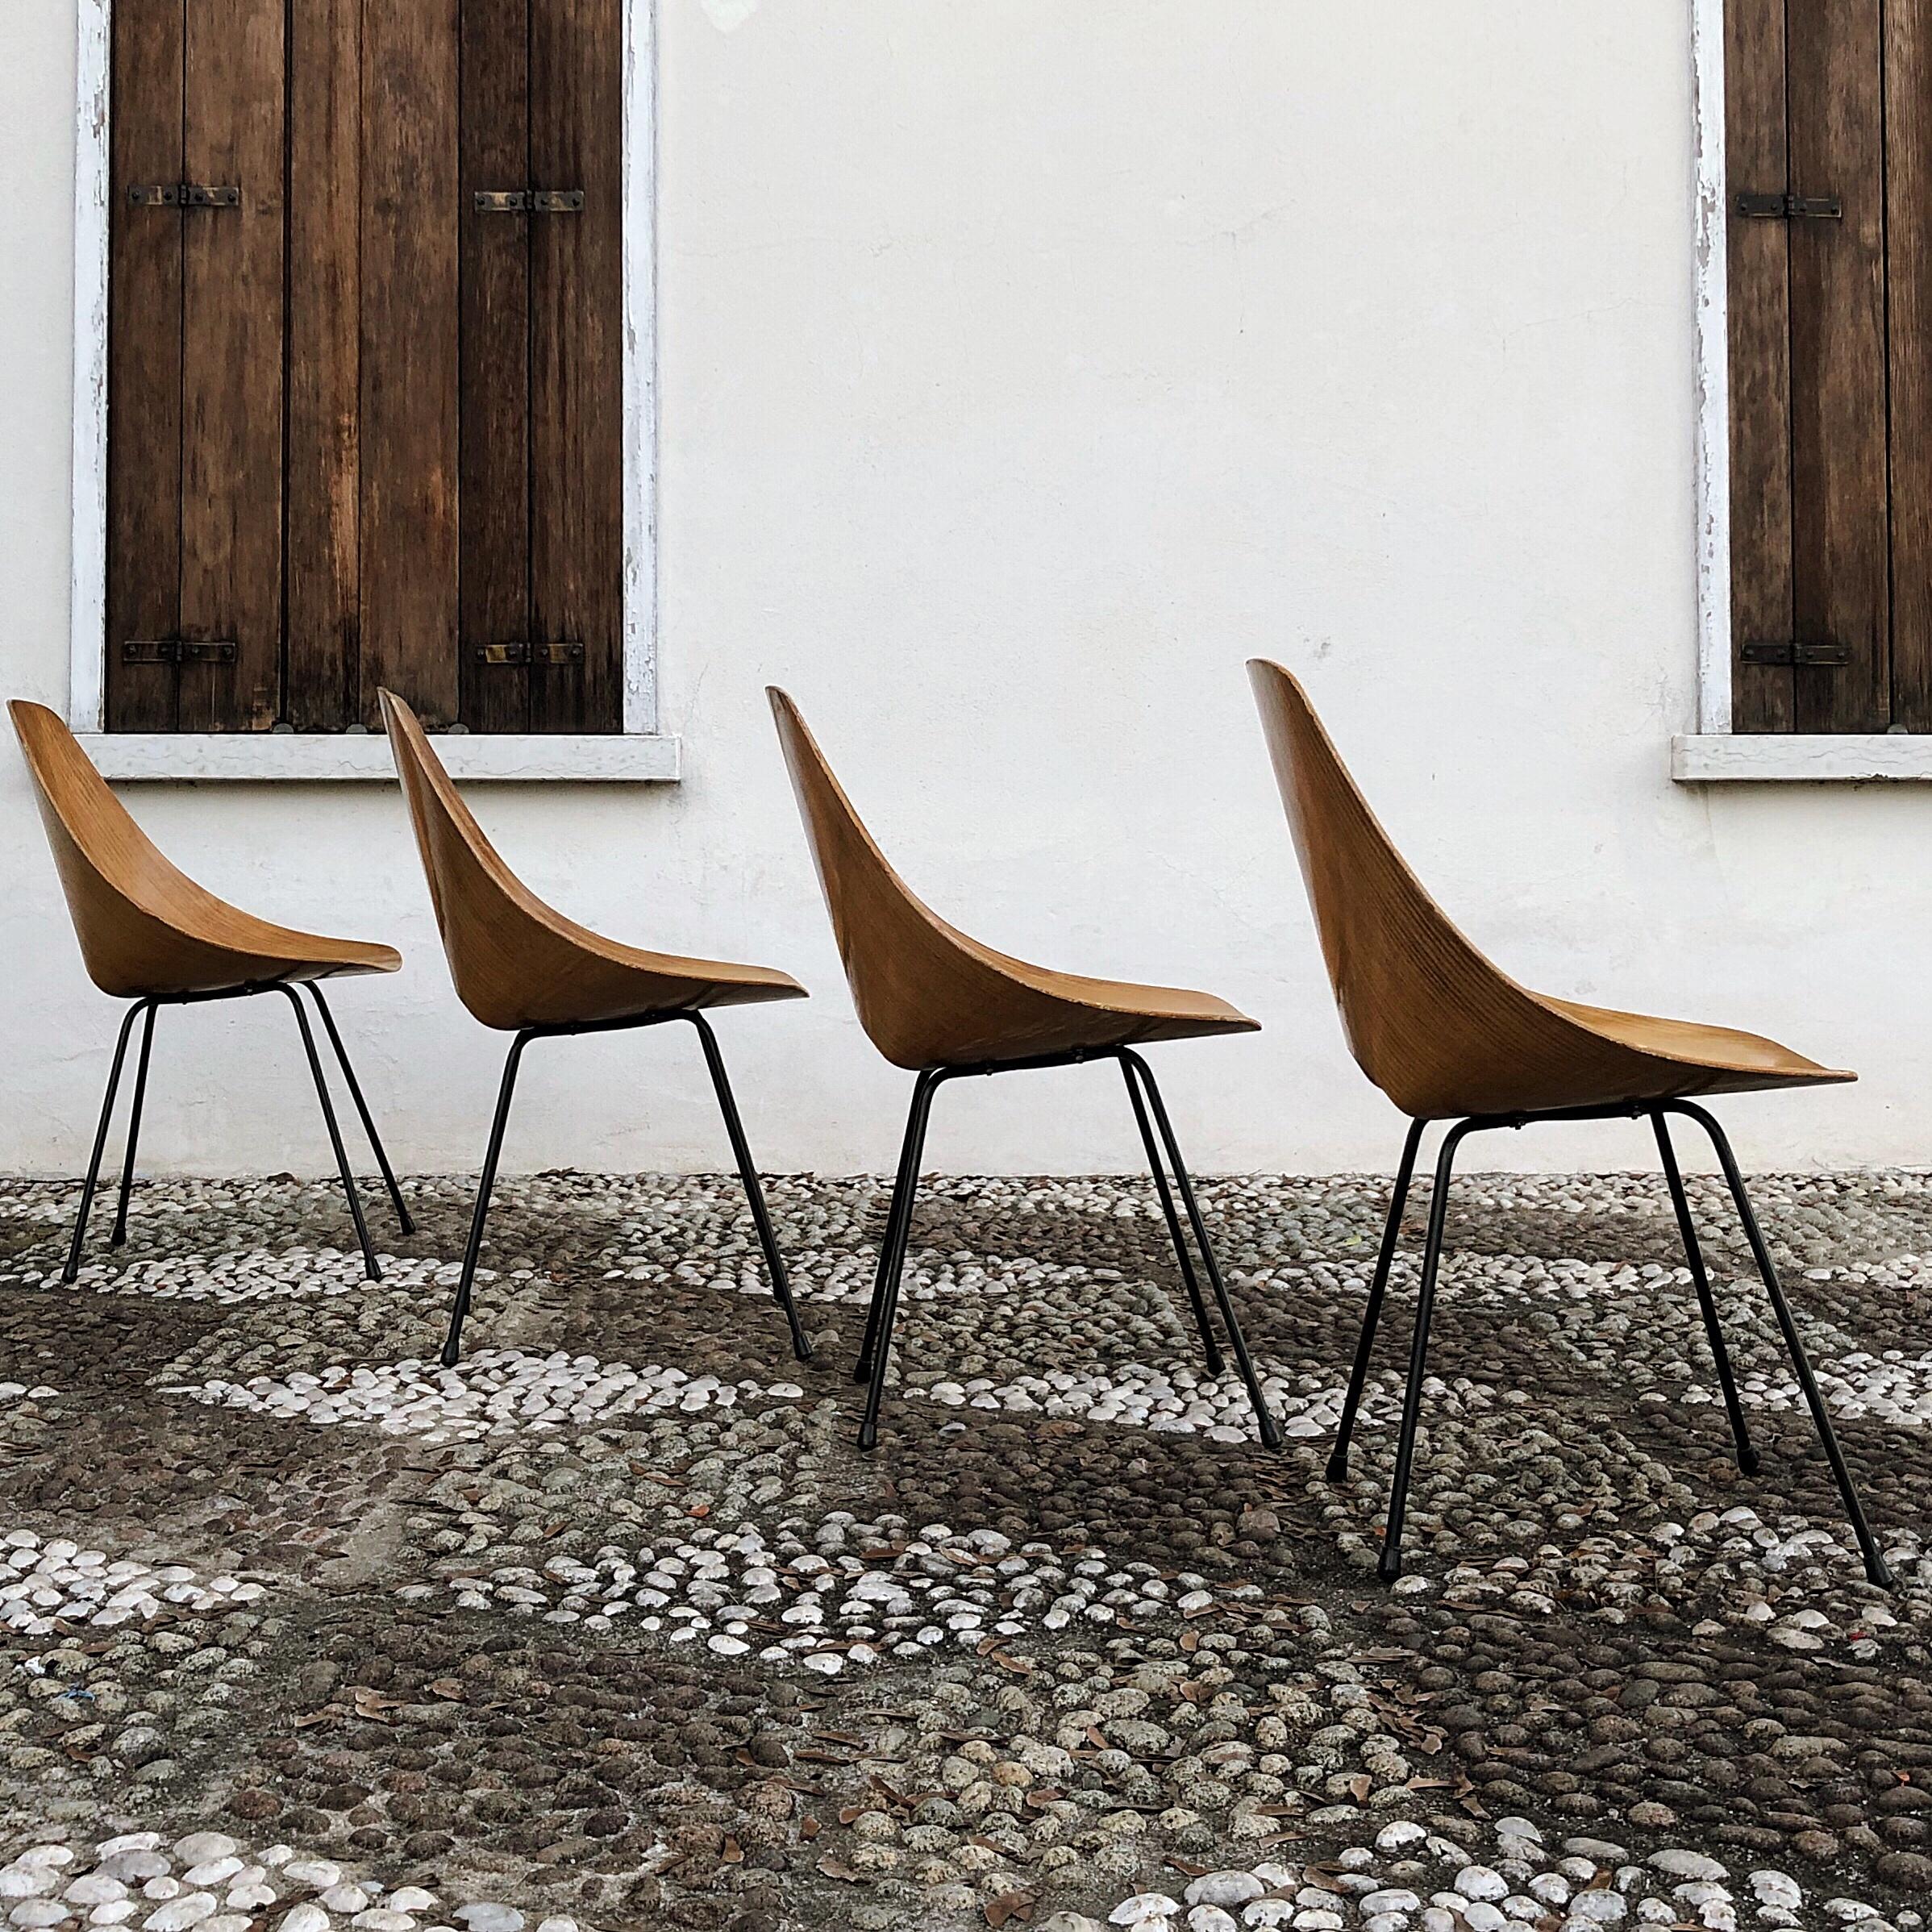 Vittorio Nobili Midcentury Ashwood Medea Dining Room Chairs, 1955, Set of Four In Good Condition For Sale In Padova, IT